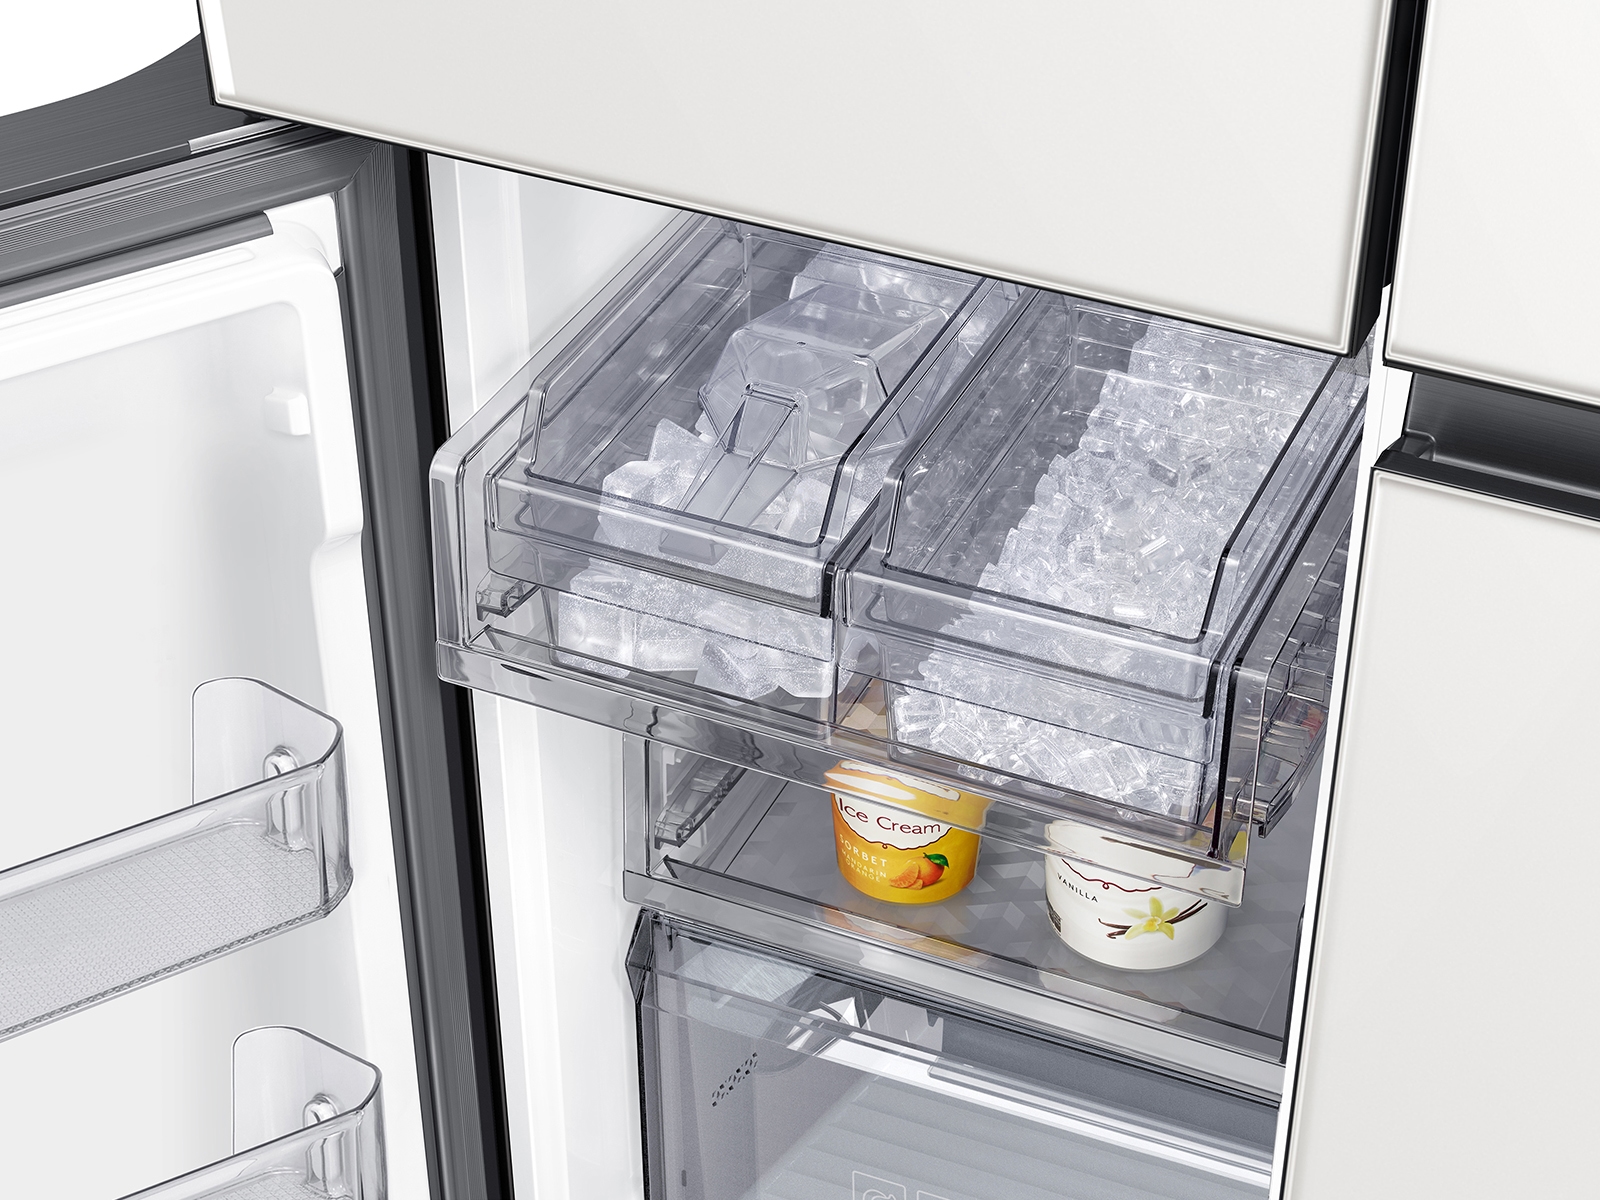 Bespoke Temperature Monitoring System - monitor your fridge or freezer from  anywhere!